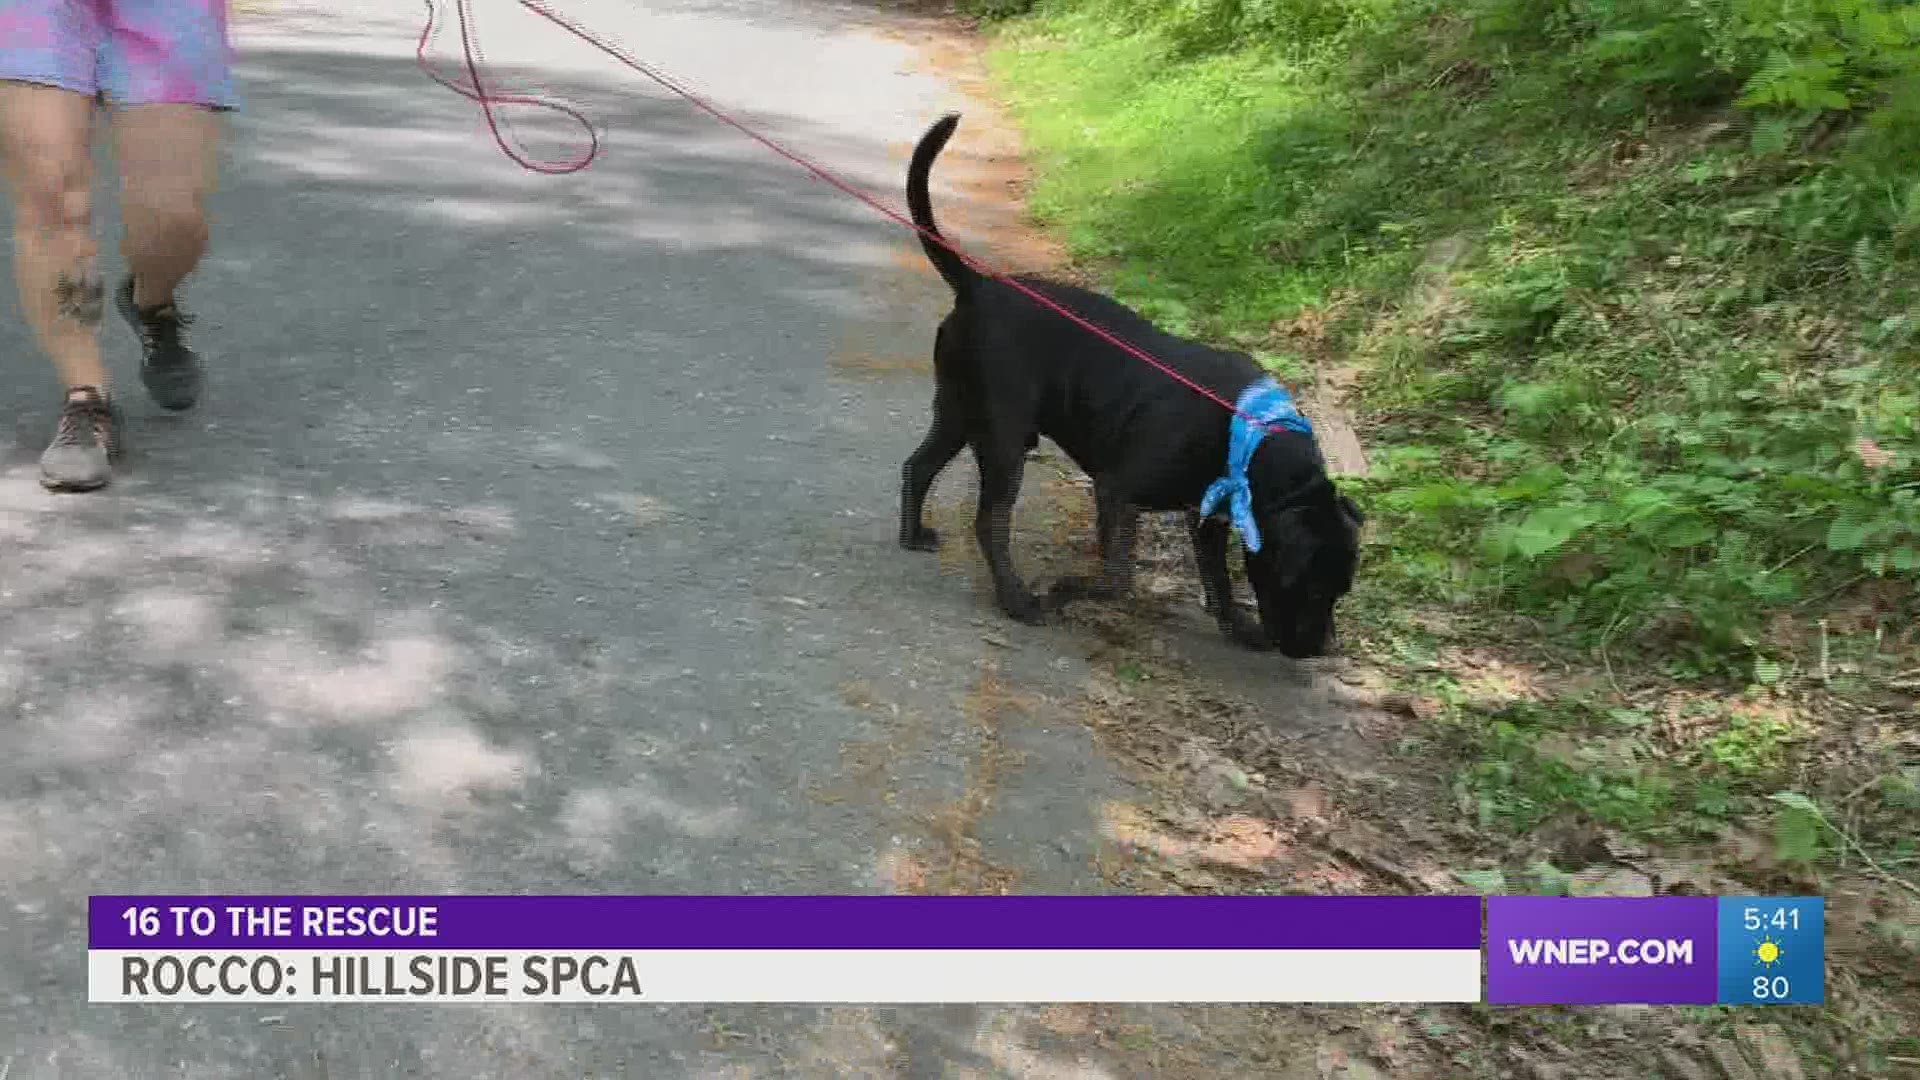 Hillside SPCA workers want Rocco back in a home before shelter life takes its toll on him.